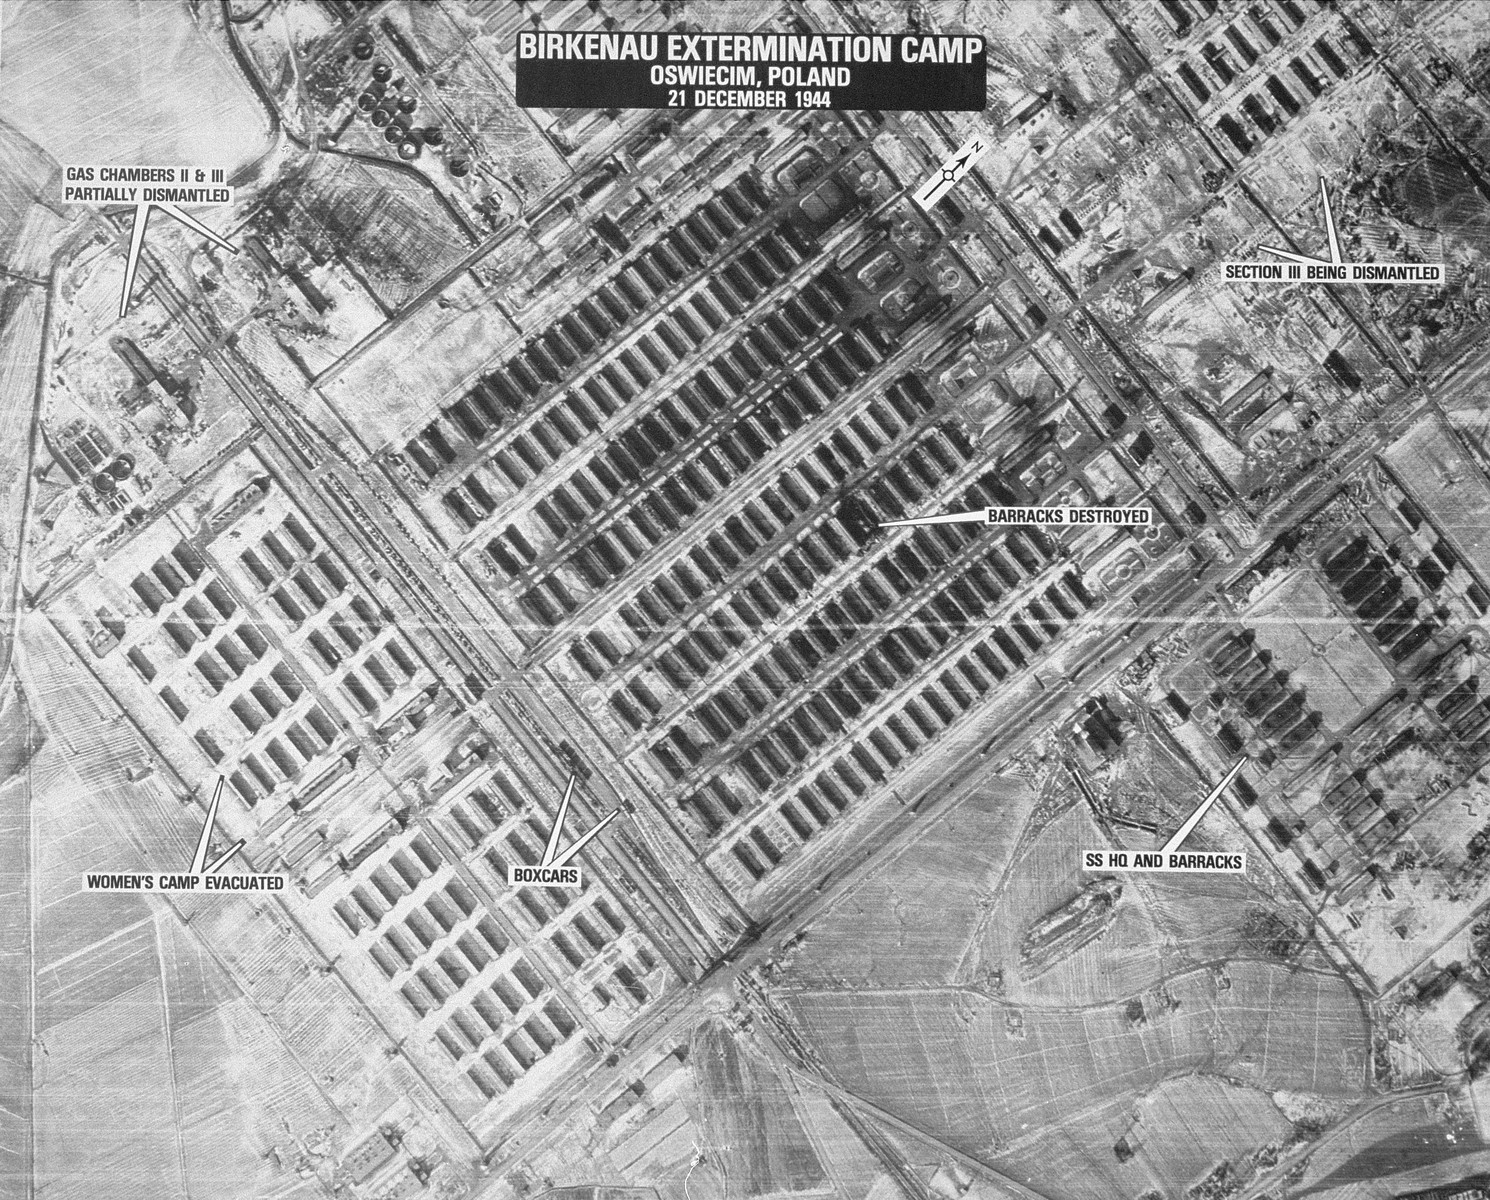 An aerial reconnaissance photograph of the Auschwitz concentration camp showing the Auschwitz II (Birkenau) camp.
Mission:  15SG/994 5PG or 15SG/997 5PG;  Scale: 1/12,500;  Focal Length: 24";  Altitude: 25,000';